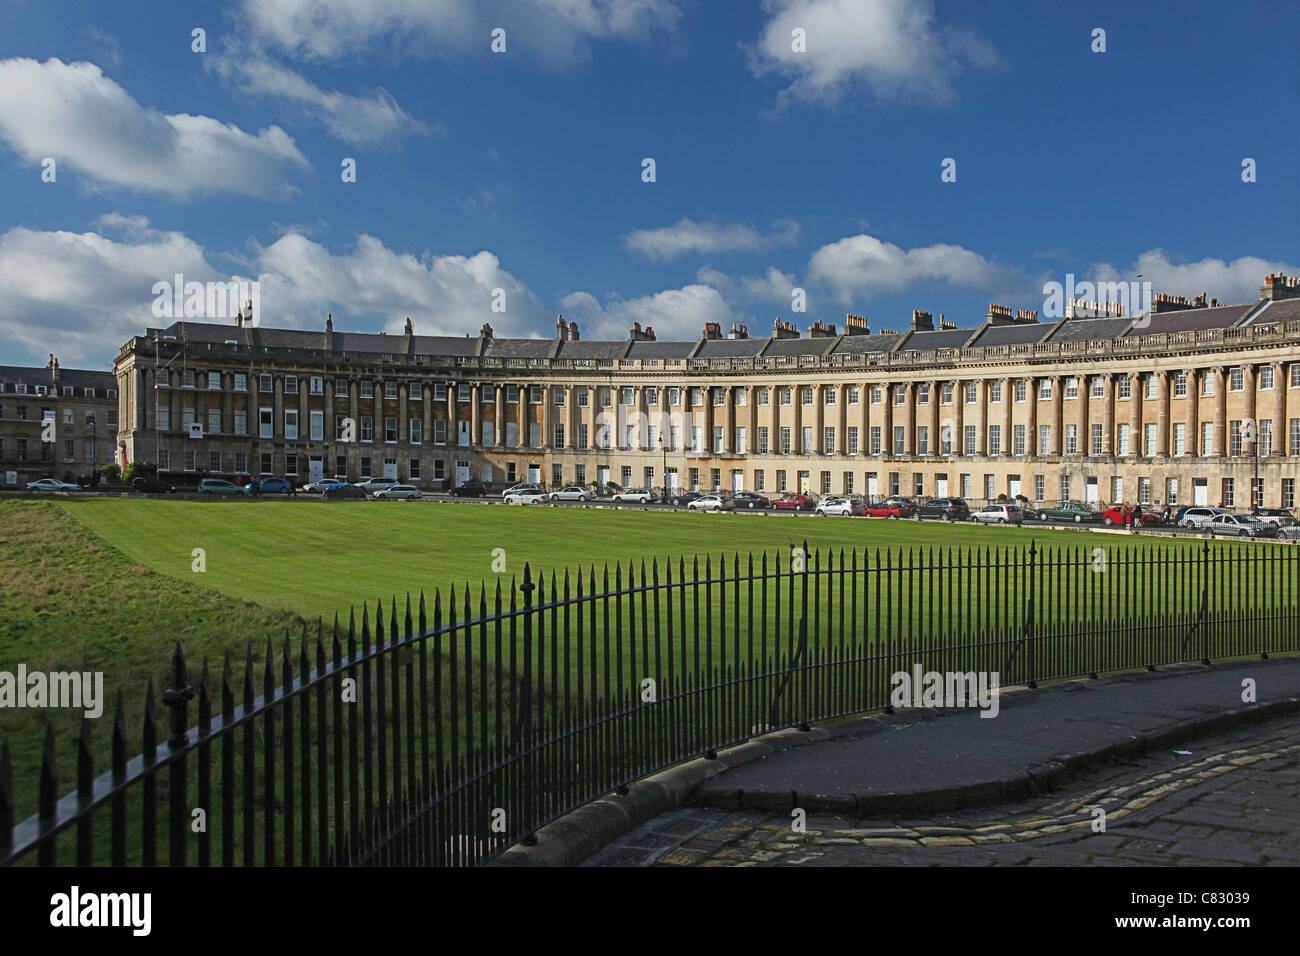 Autumn sunshine on the Georgian architecture of The Royal Crescent in Bath, N.E. Somerset, England, UK Stock Photo